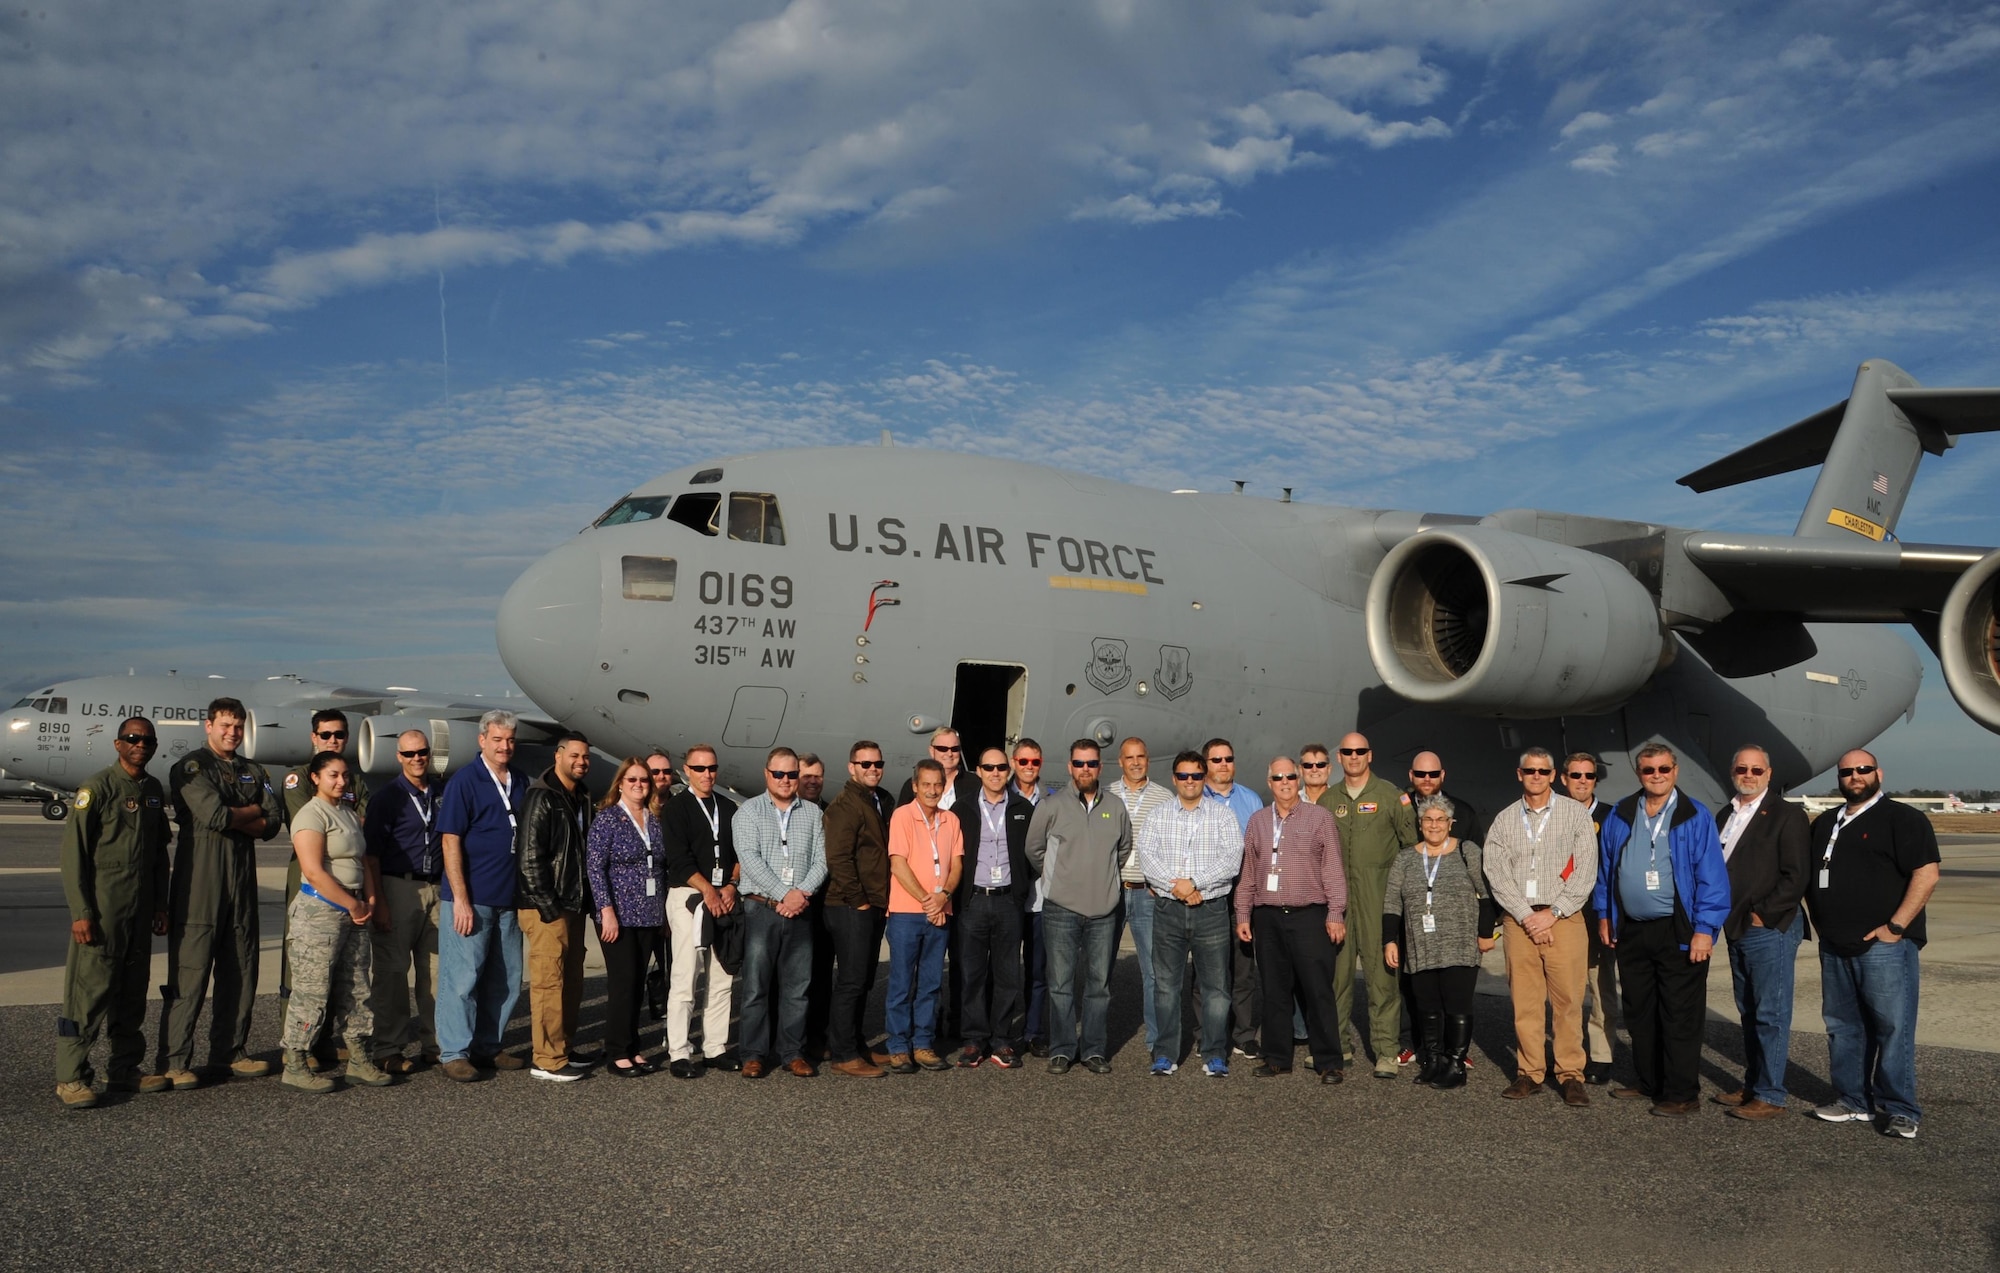 Nearly 30 civilian employers and civic leaders from the state of Florida visited Joint Base Charleston S.C., as part of the 927 ARW/ESGR bosslift, January 19-20, 2017. The overnight event allowed the civilians to visit three Air Force Reserve wings, and gain an understanding of life as a Citizen Airman. (U.S. Air Force photo by Tech Sgt. Peter Dean)